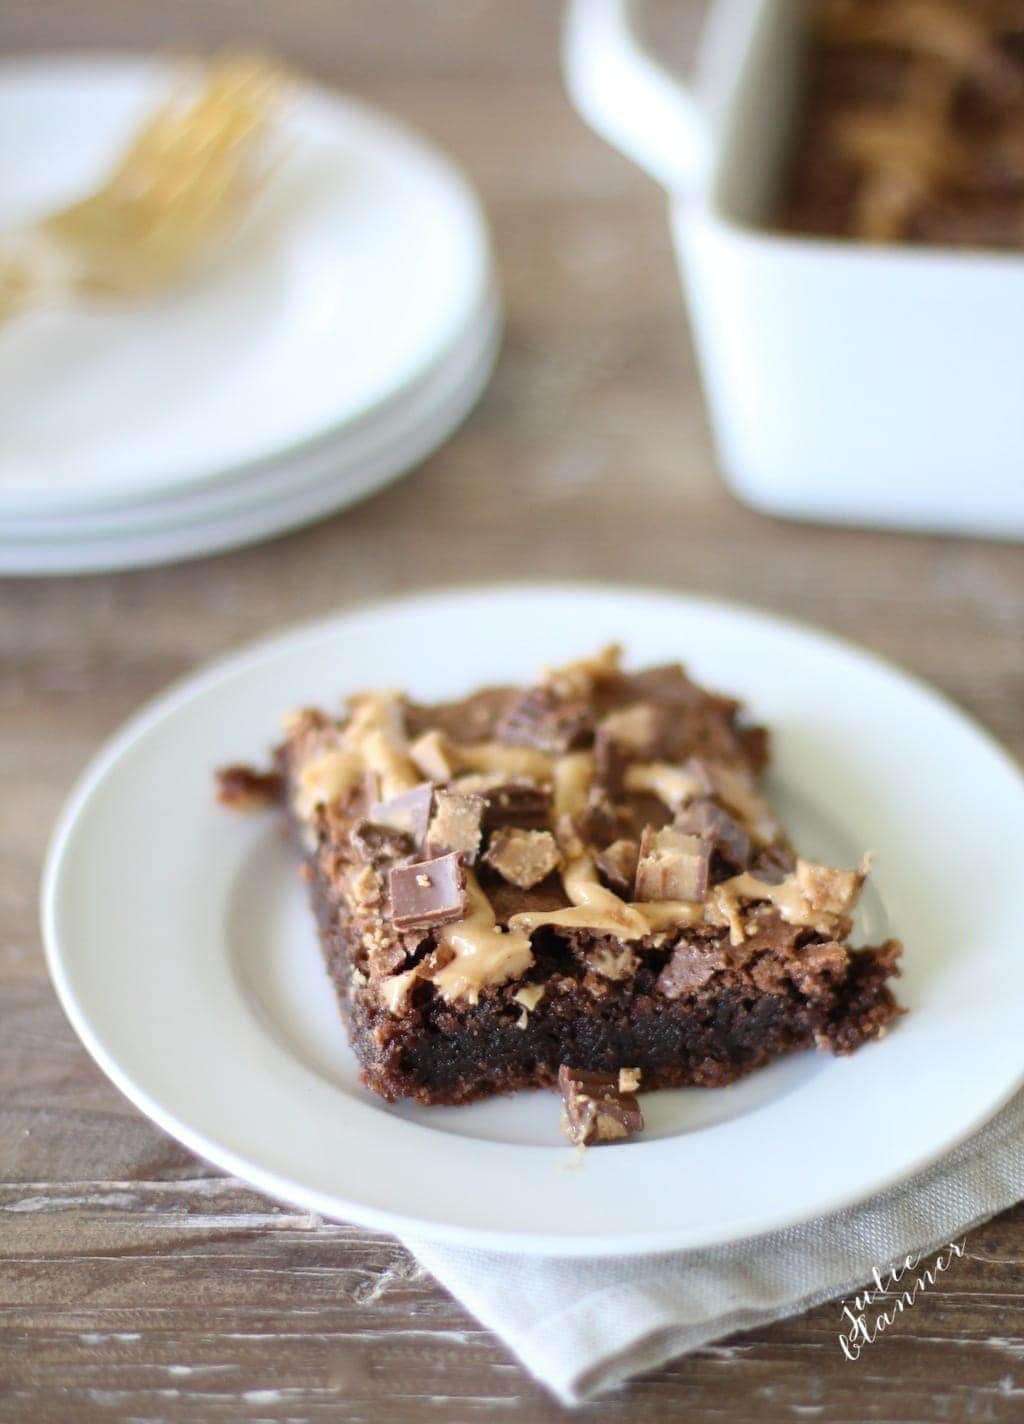 Chocolate Peanut Butter Brownies in minutes - you'll never use another mix!